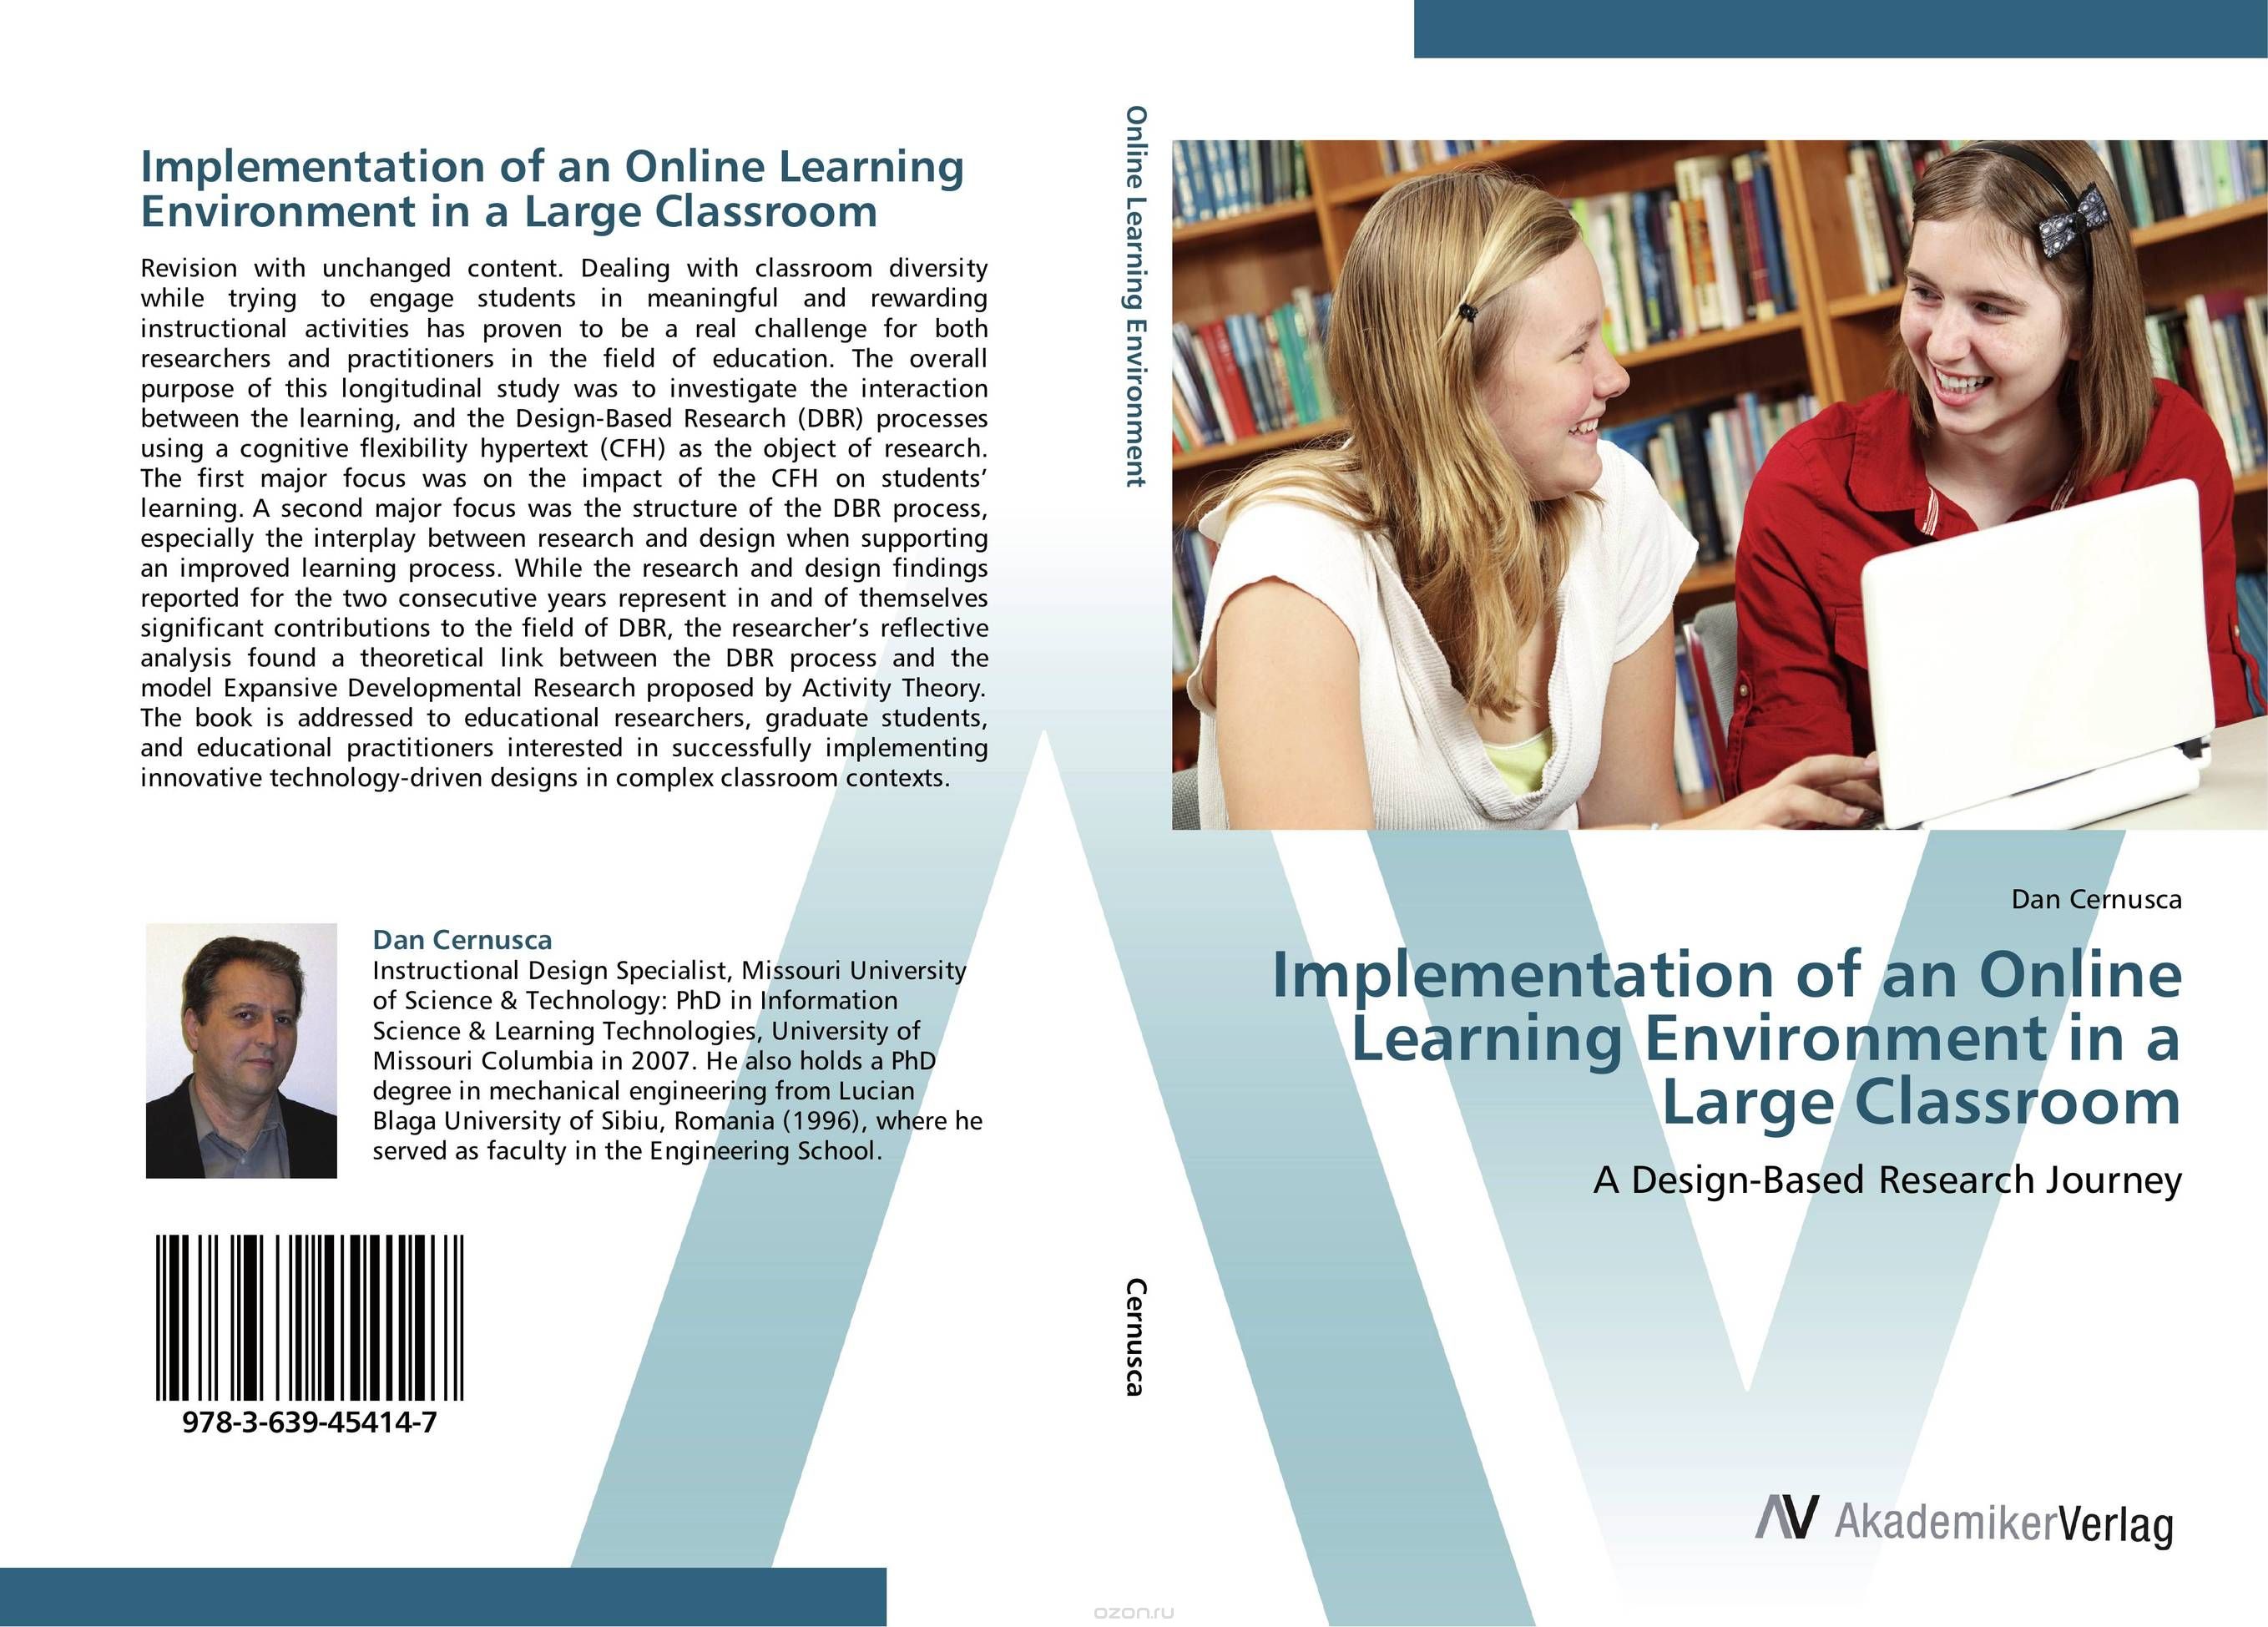 Скачать книгу "Implementation of an Online Learning Environment in a Large Classroom"